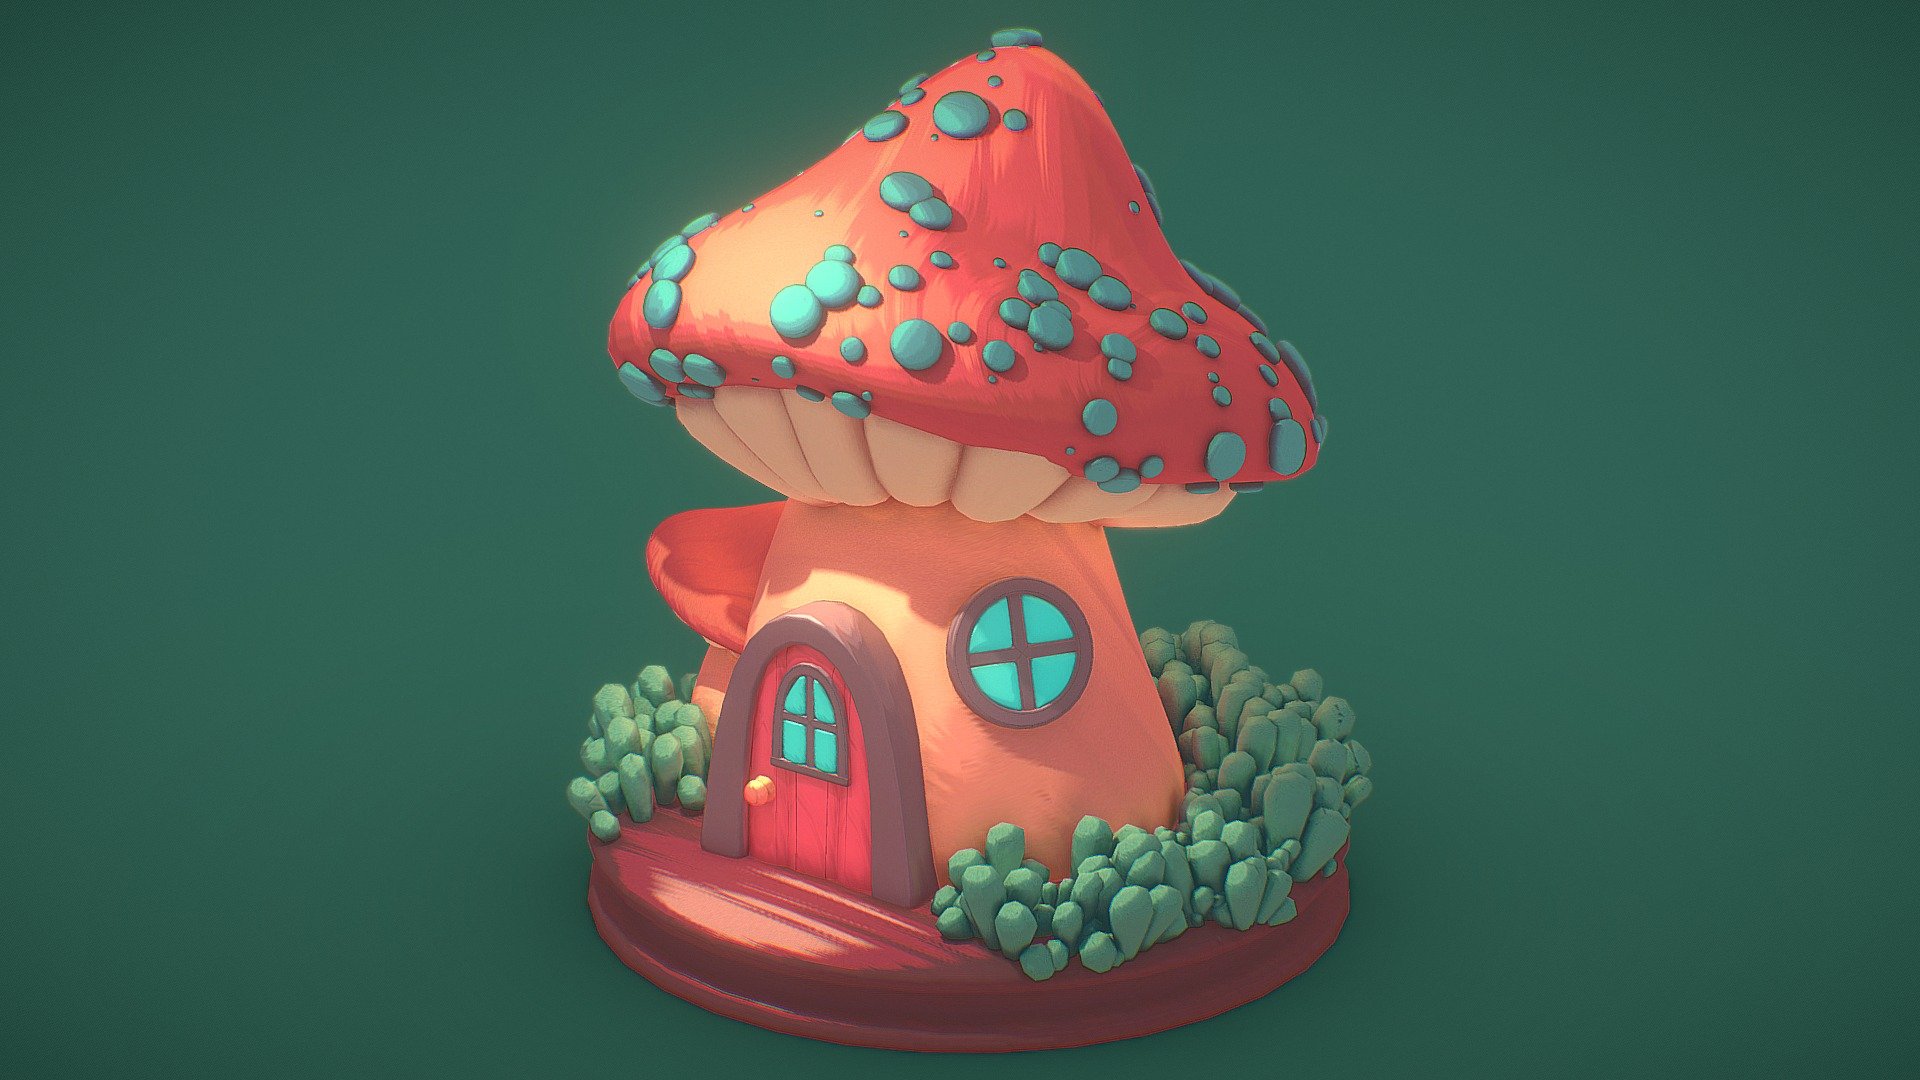 Every texture was produced procedurally, giving the model a stylized, hand painted, painterly look. Inside the file, you'll find both the Eevee and Cycles version of the material. For the scene collection, you can replace the baked textures with their corresponding procedural materials and render it using Cycles.

(C) David Lettier 2020

lettier.com - Mushroom House - Download Free 3D model by lettier 3d model